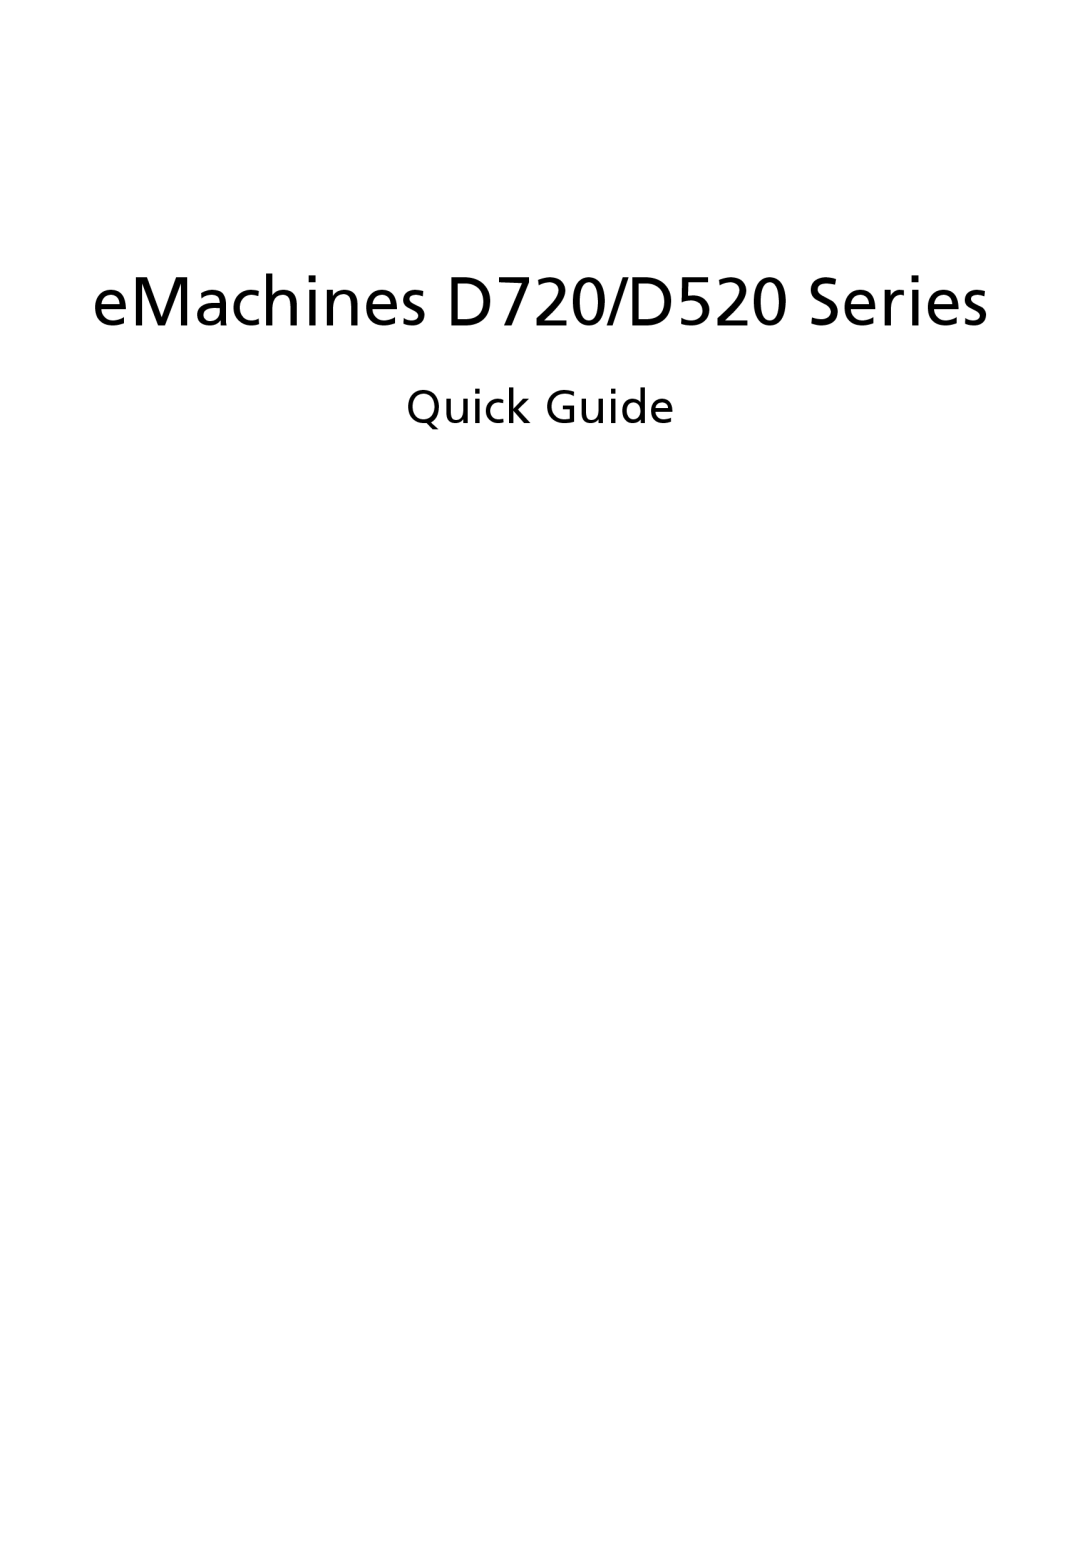 eMachines D720 Series manual Quick Guide, eMachines D720/D520 Series 